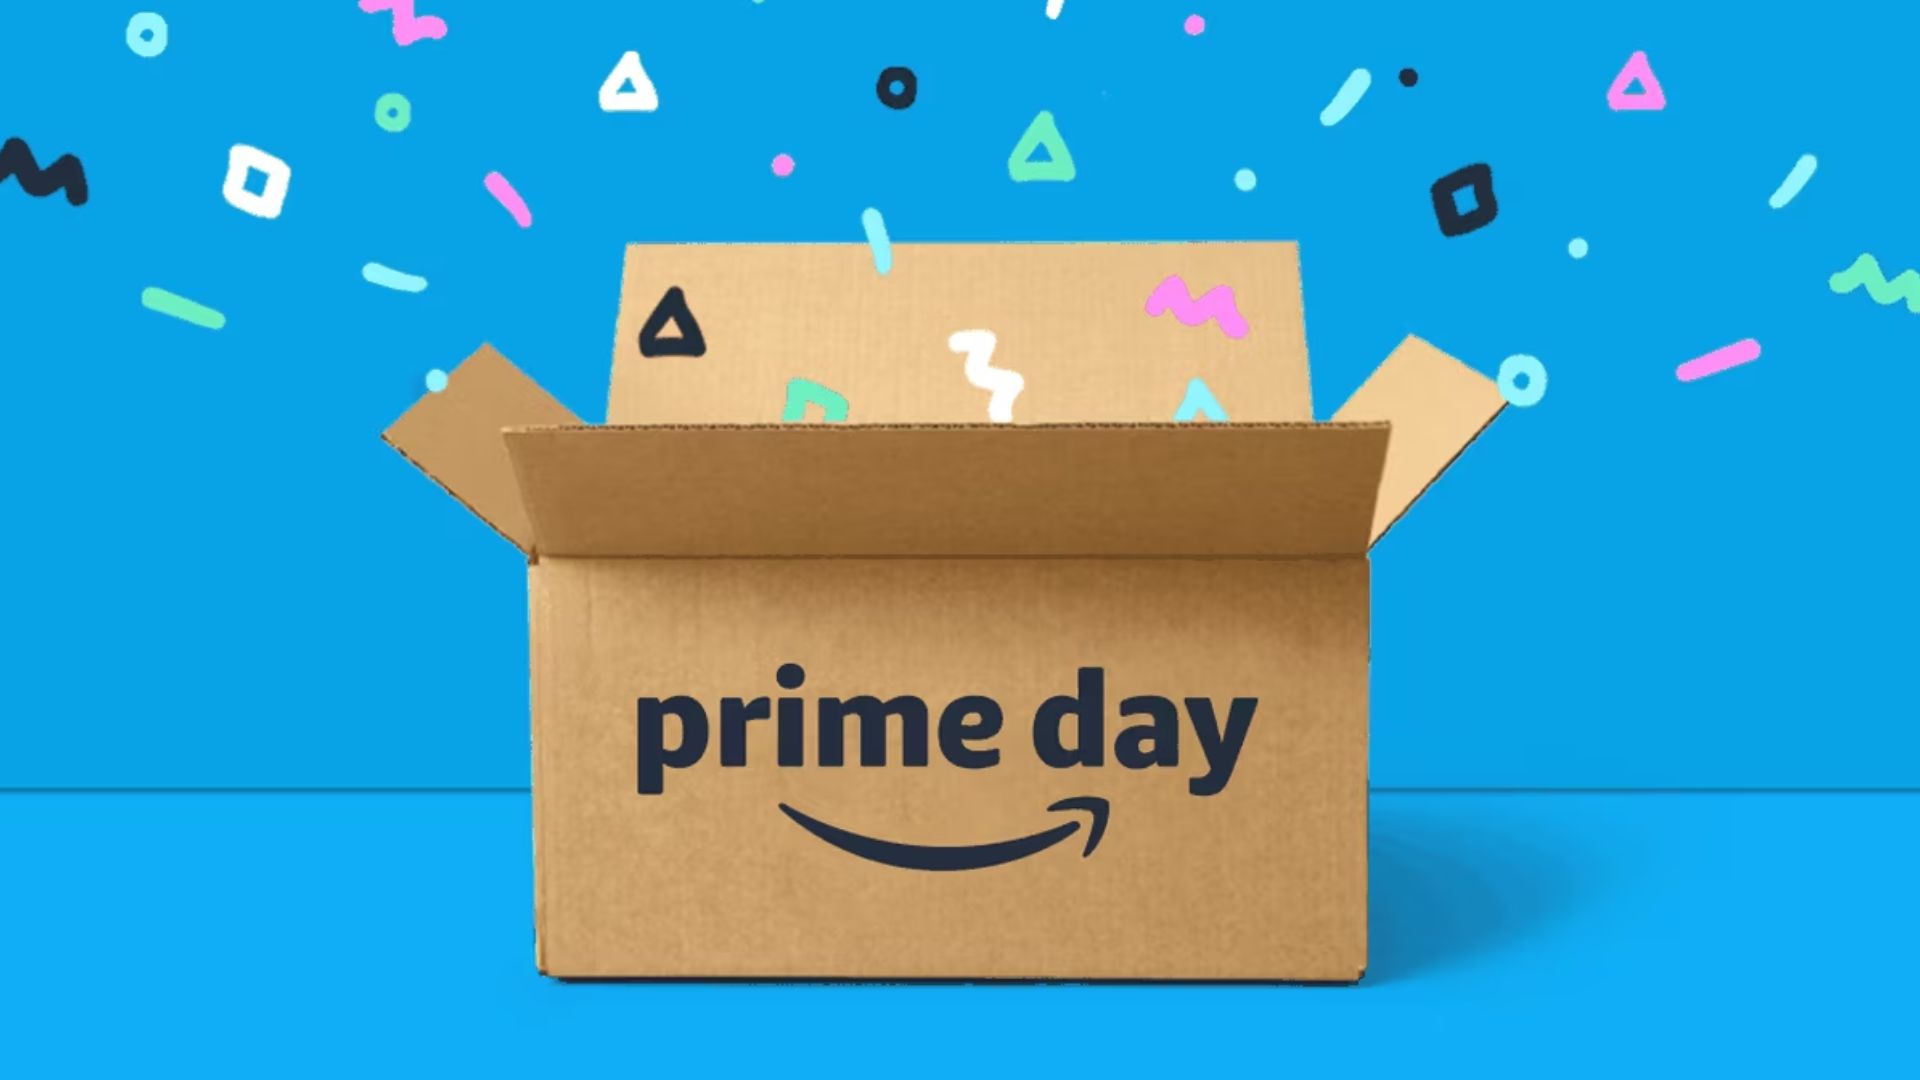 Amazon Prime Day Sale From July 15th, New Product Customization Feature Arrived